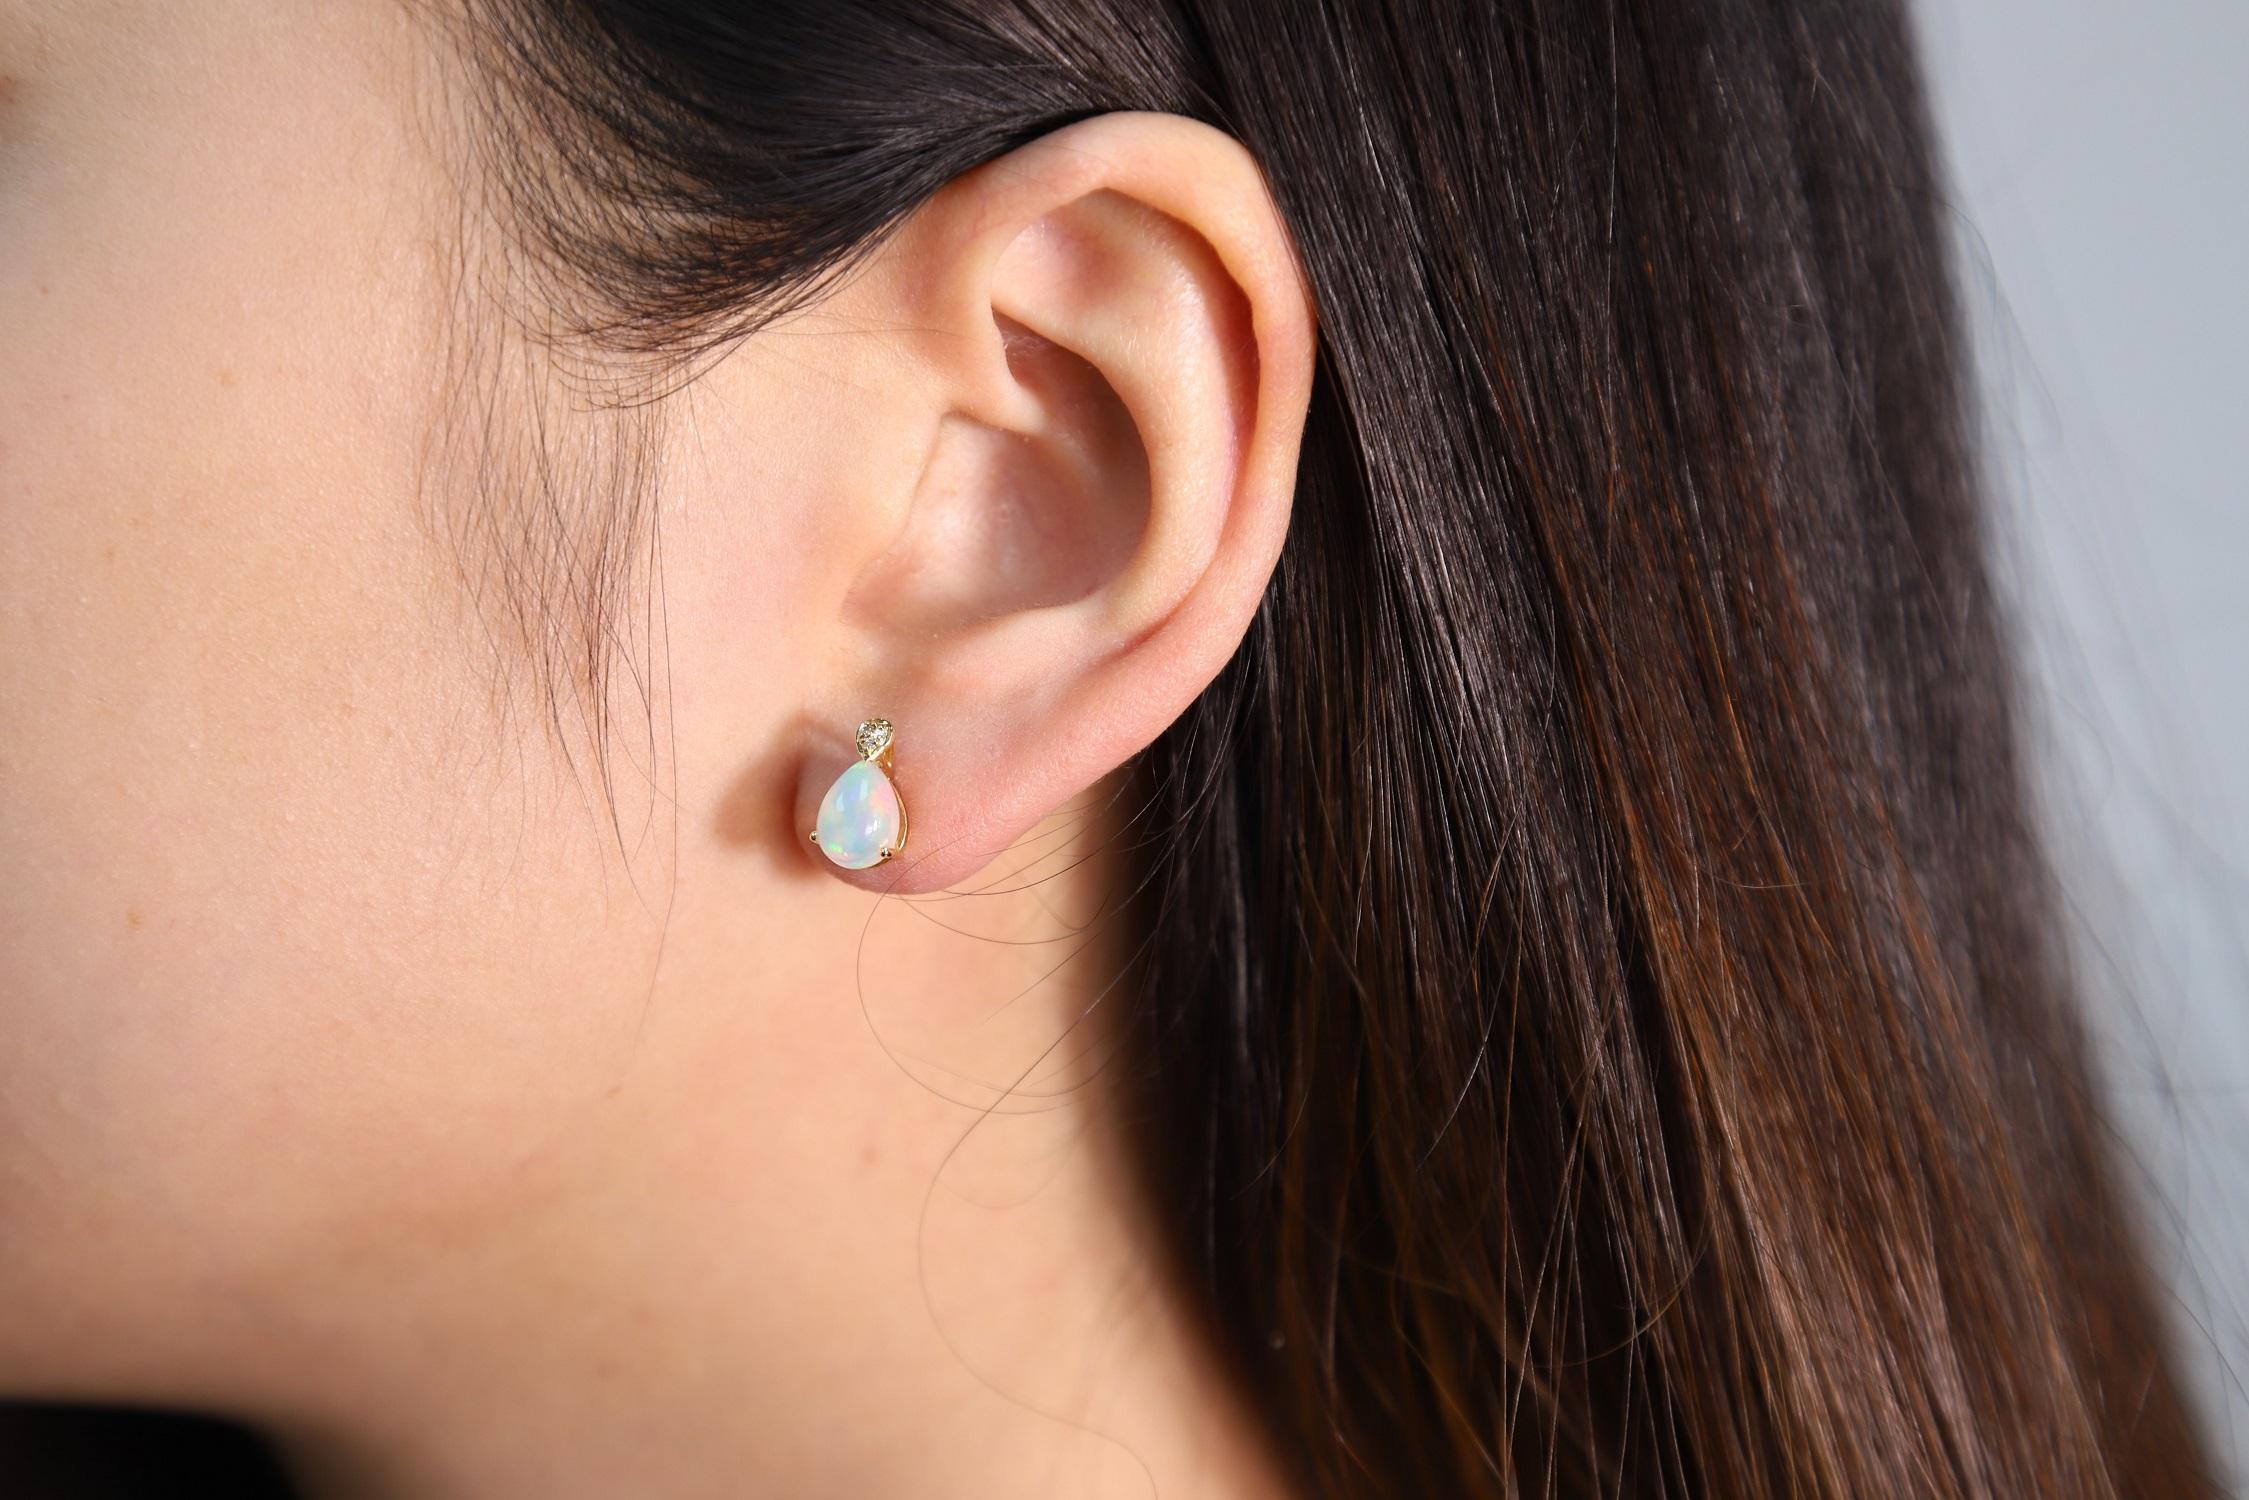 Stunning, timeless and classy eternity Unique Earring. Decorate yourself in luxury with this Gin & Grace Earring. The 10k Yellow Gold jewelry boasts 8x6 Pear Cab Prong Setting Genuine Ethiopian Opal (2 pcs) 1.54 Carat, along with Natural Round cut